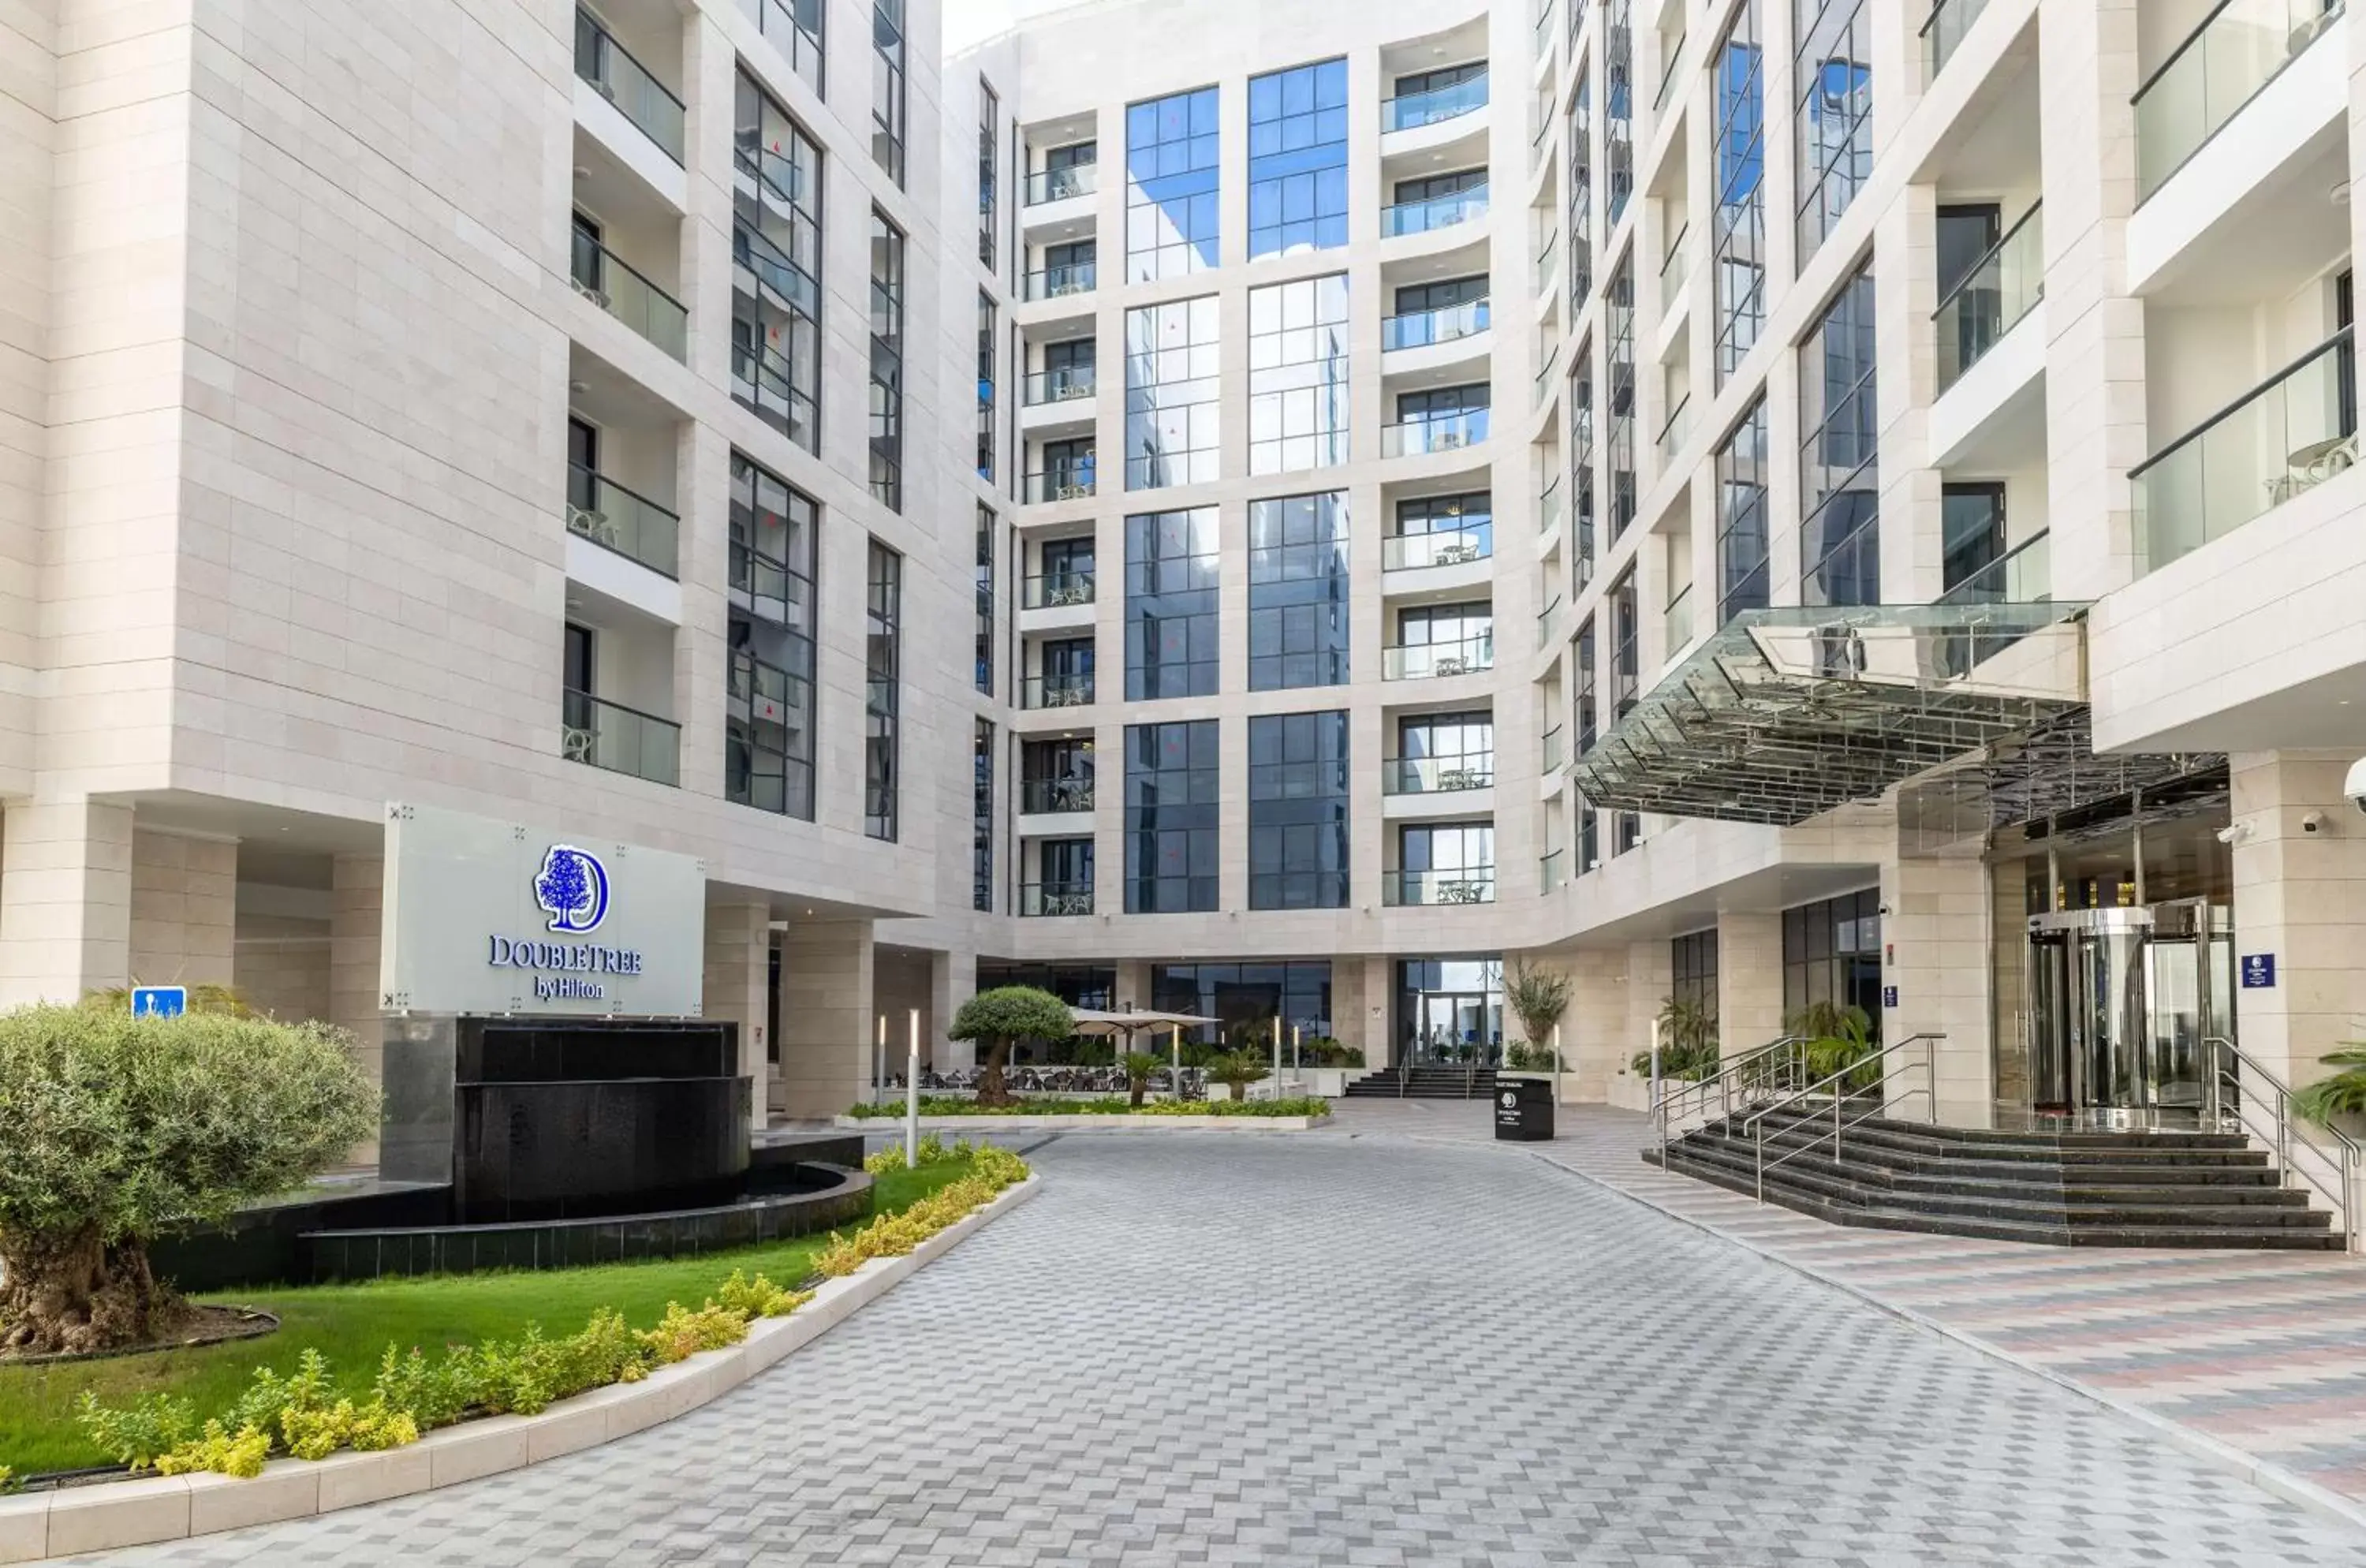 Property Building in DoubleTree by Hilton Doha Downtown